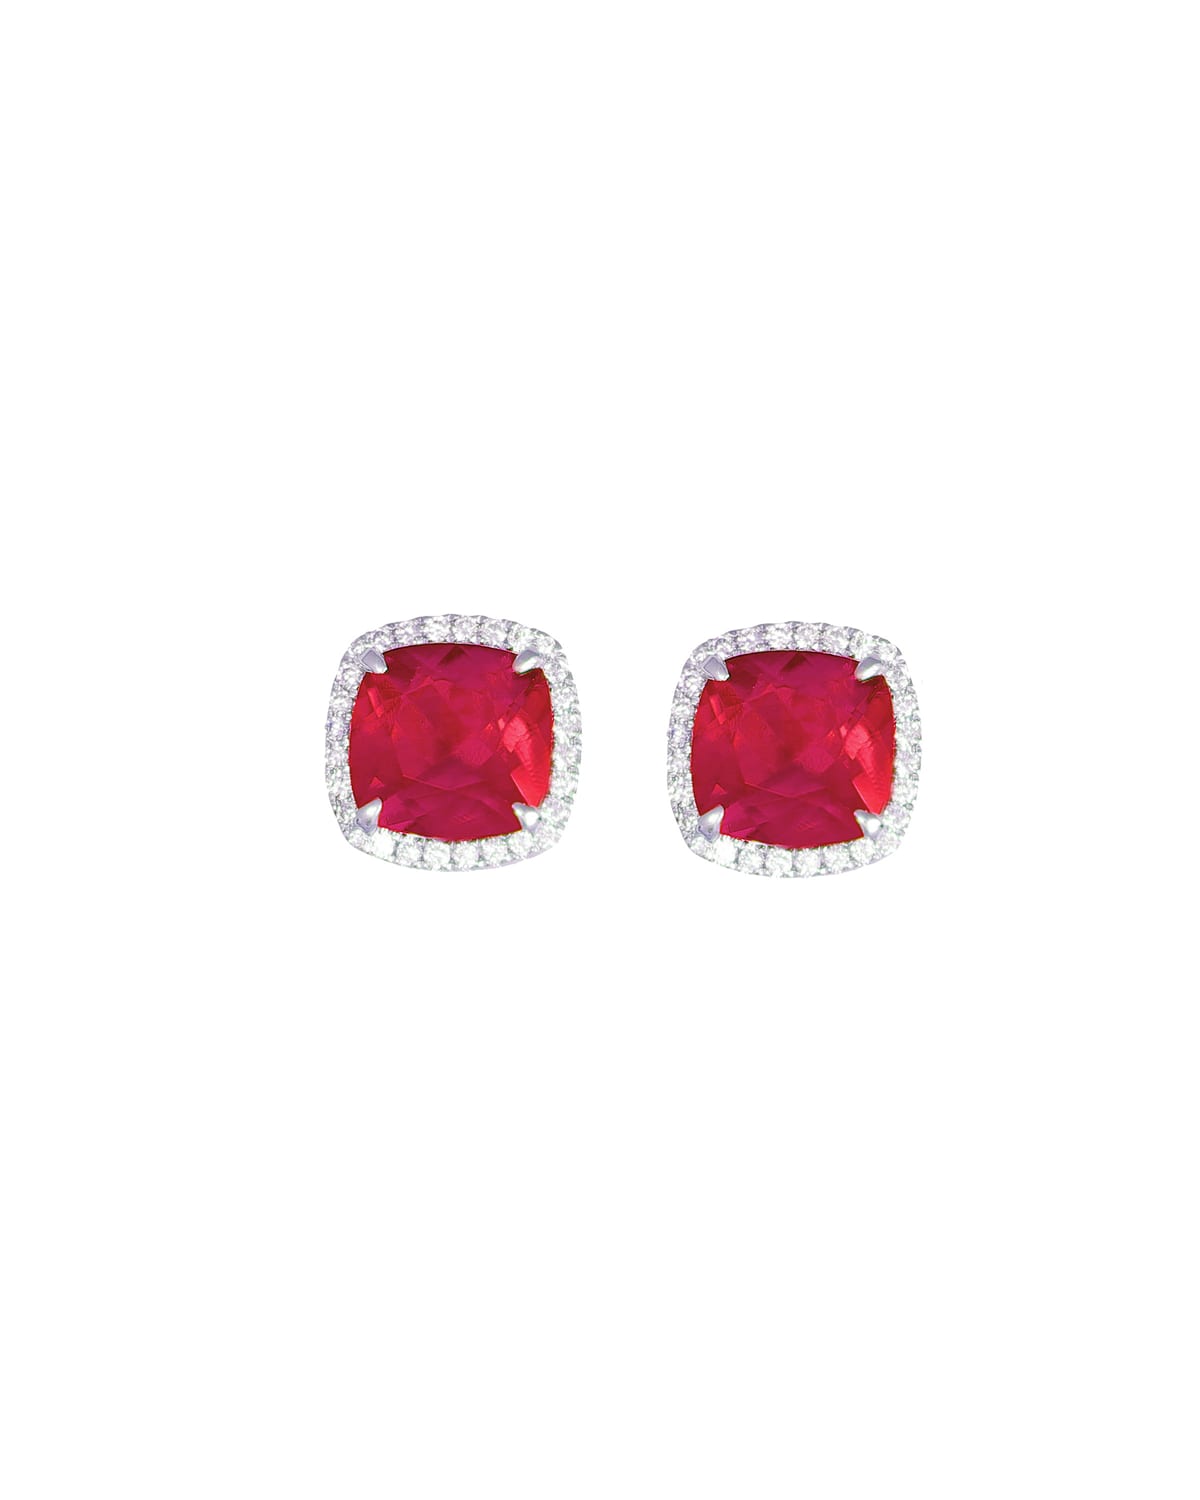 Frederic Sage 18k White Gold Ruby Cushion & Diamond Earrings In Pink